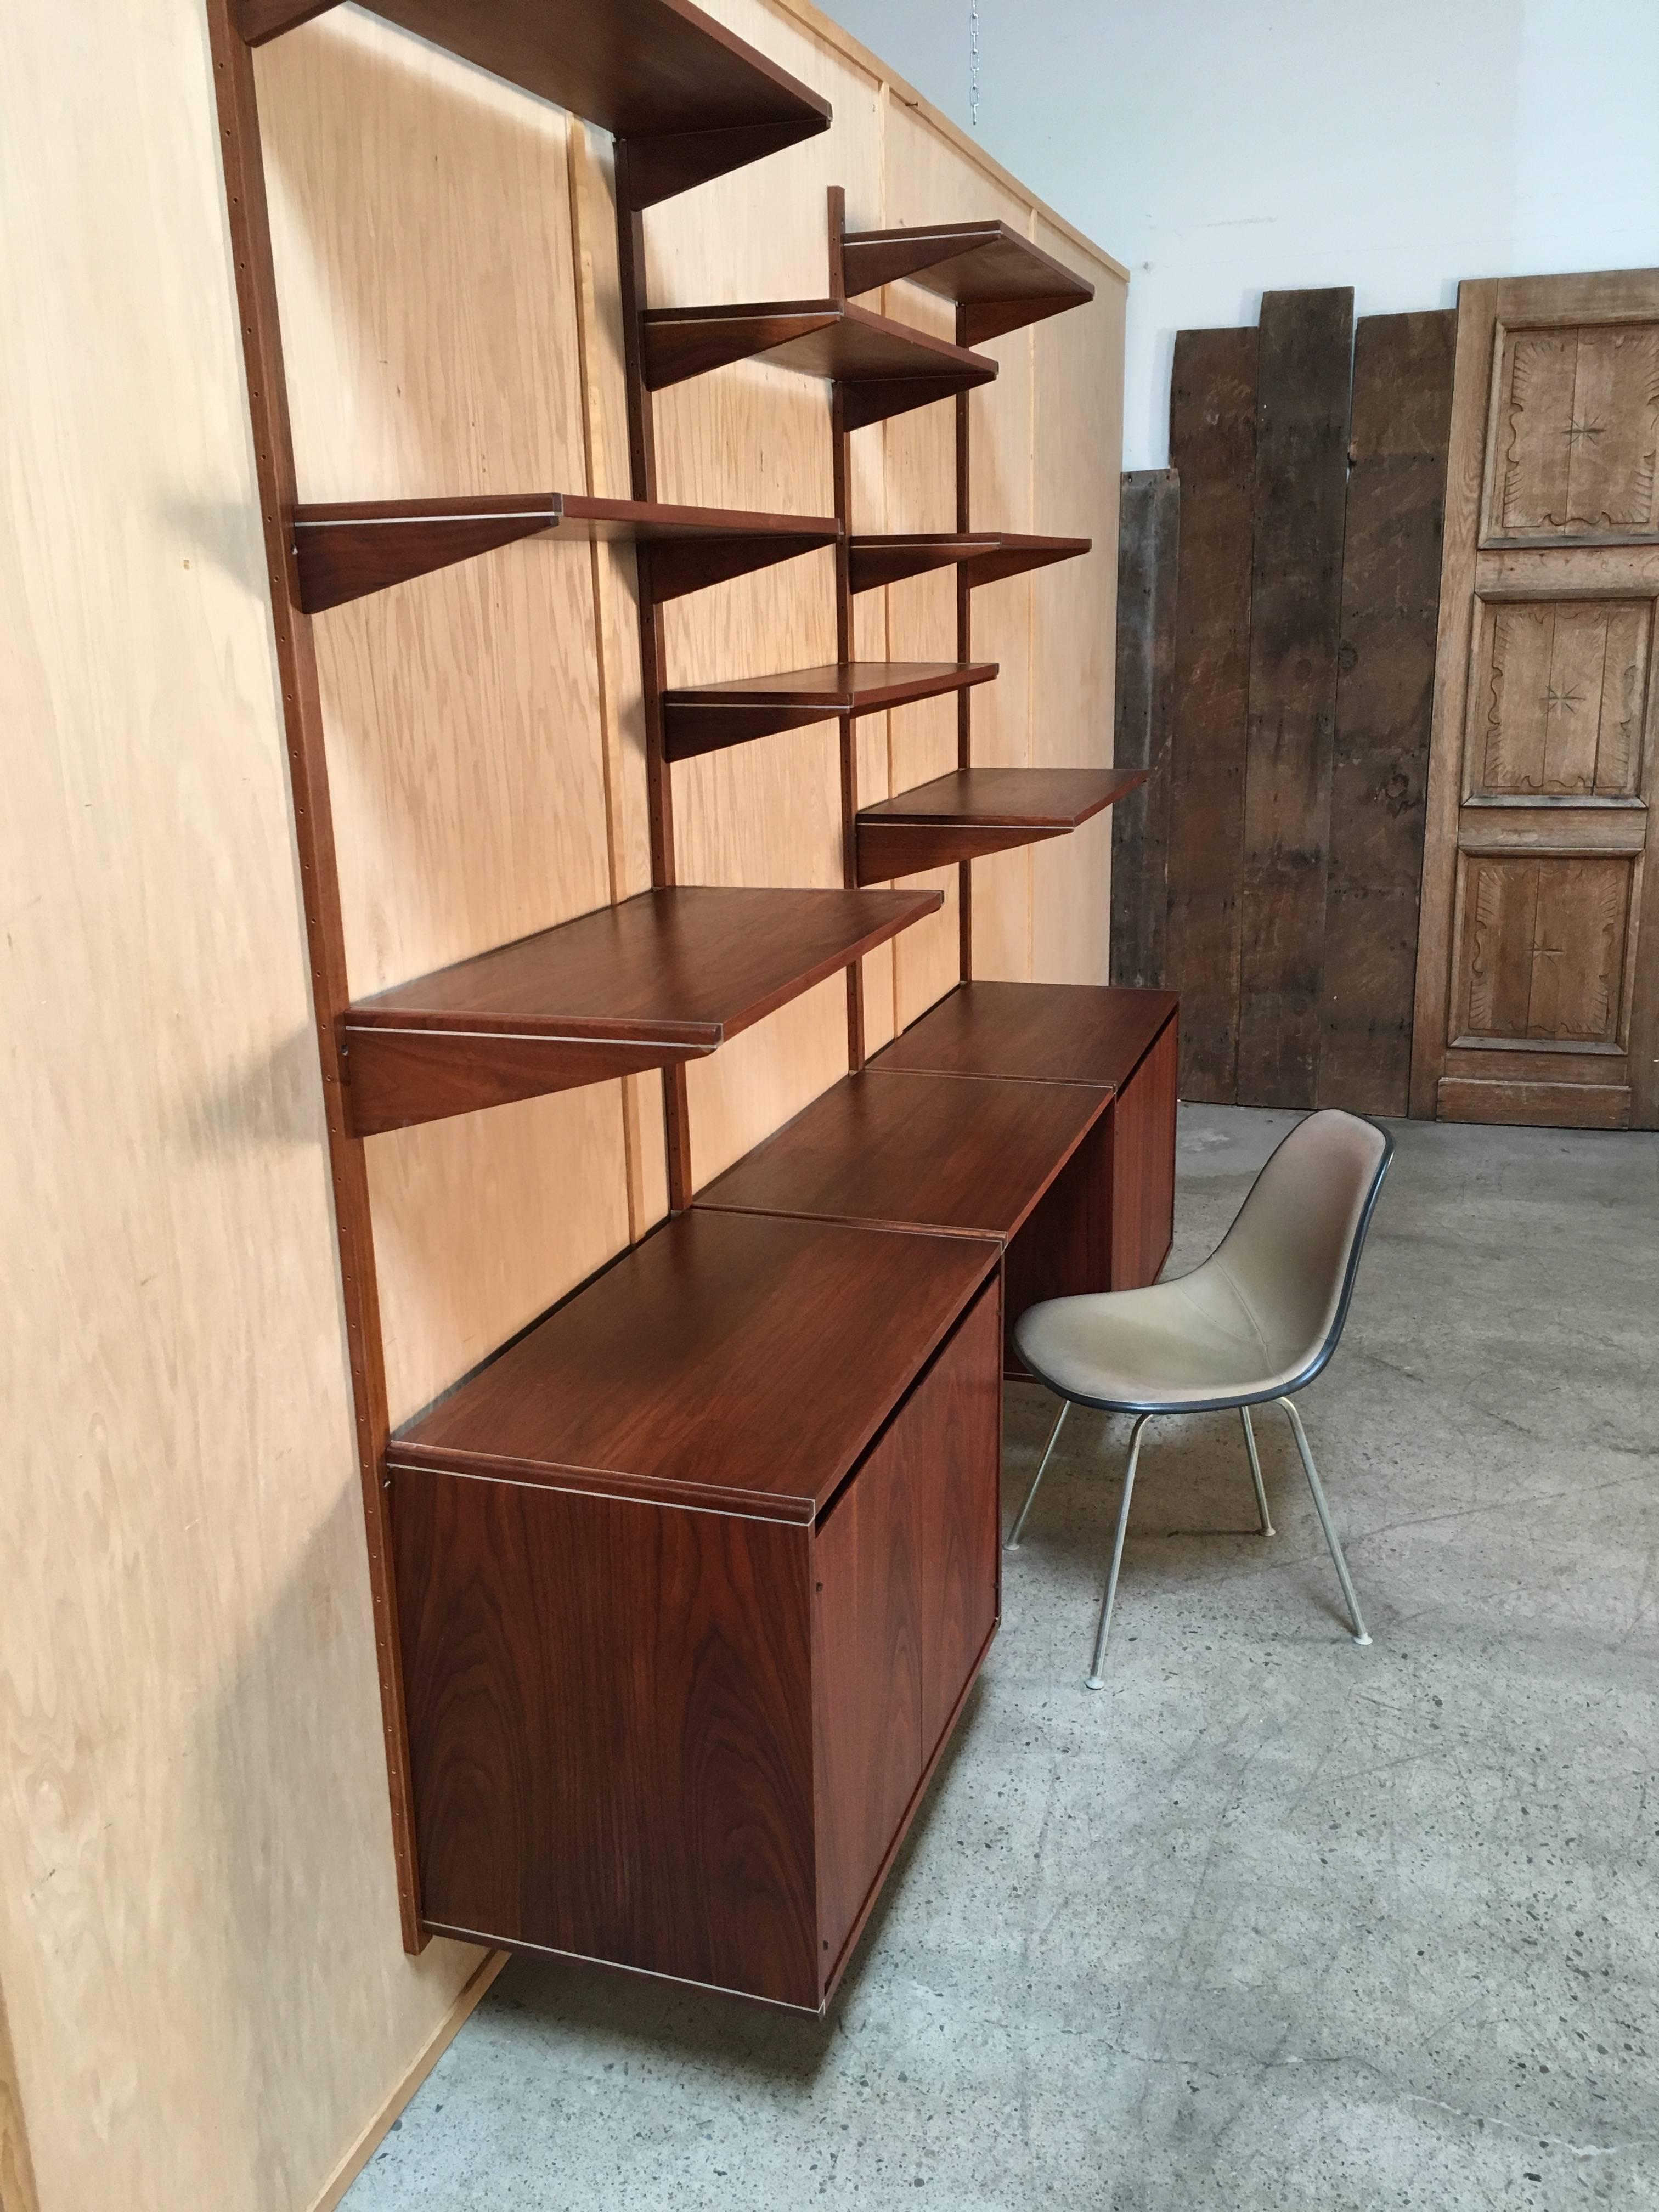 Walnut with aluminium trim floating wall unit or shelving unit by Barzilay of Los Angeles.
 